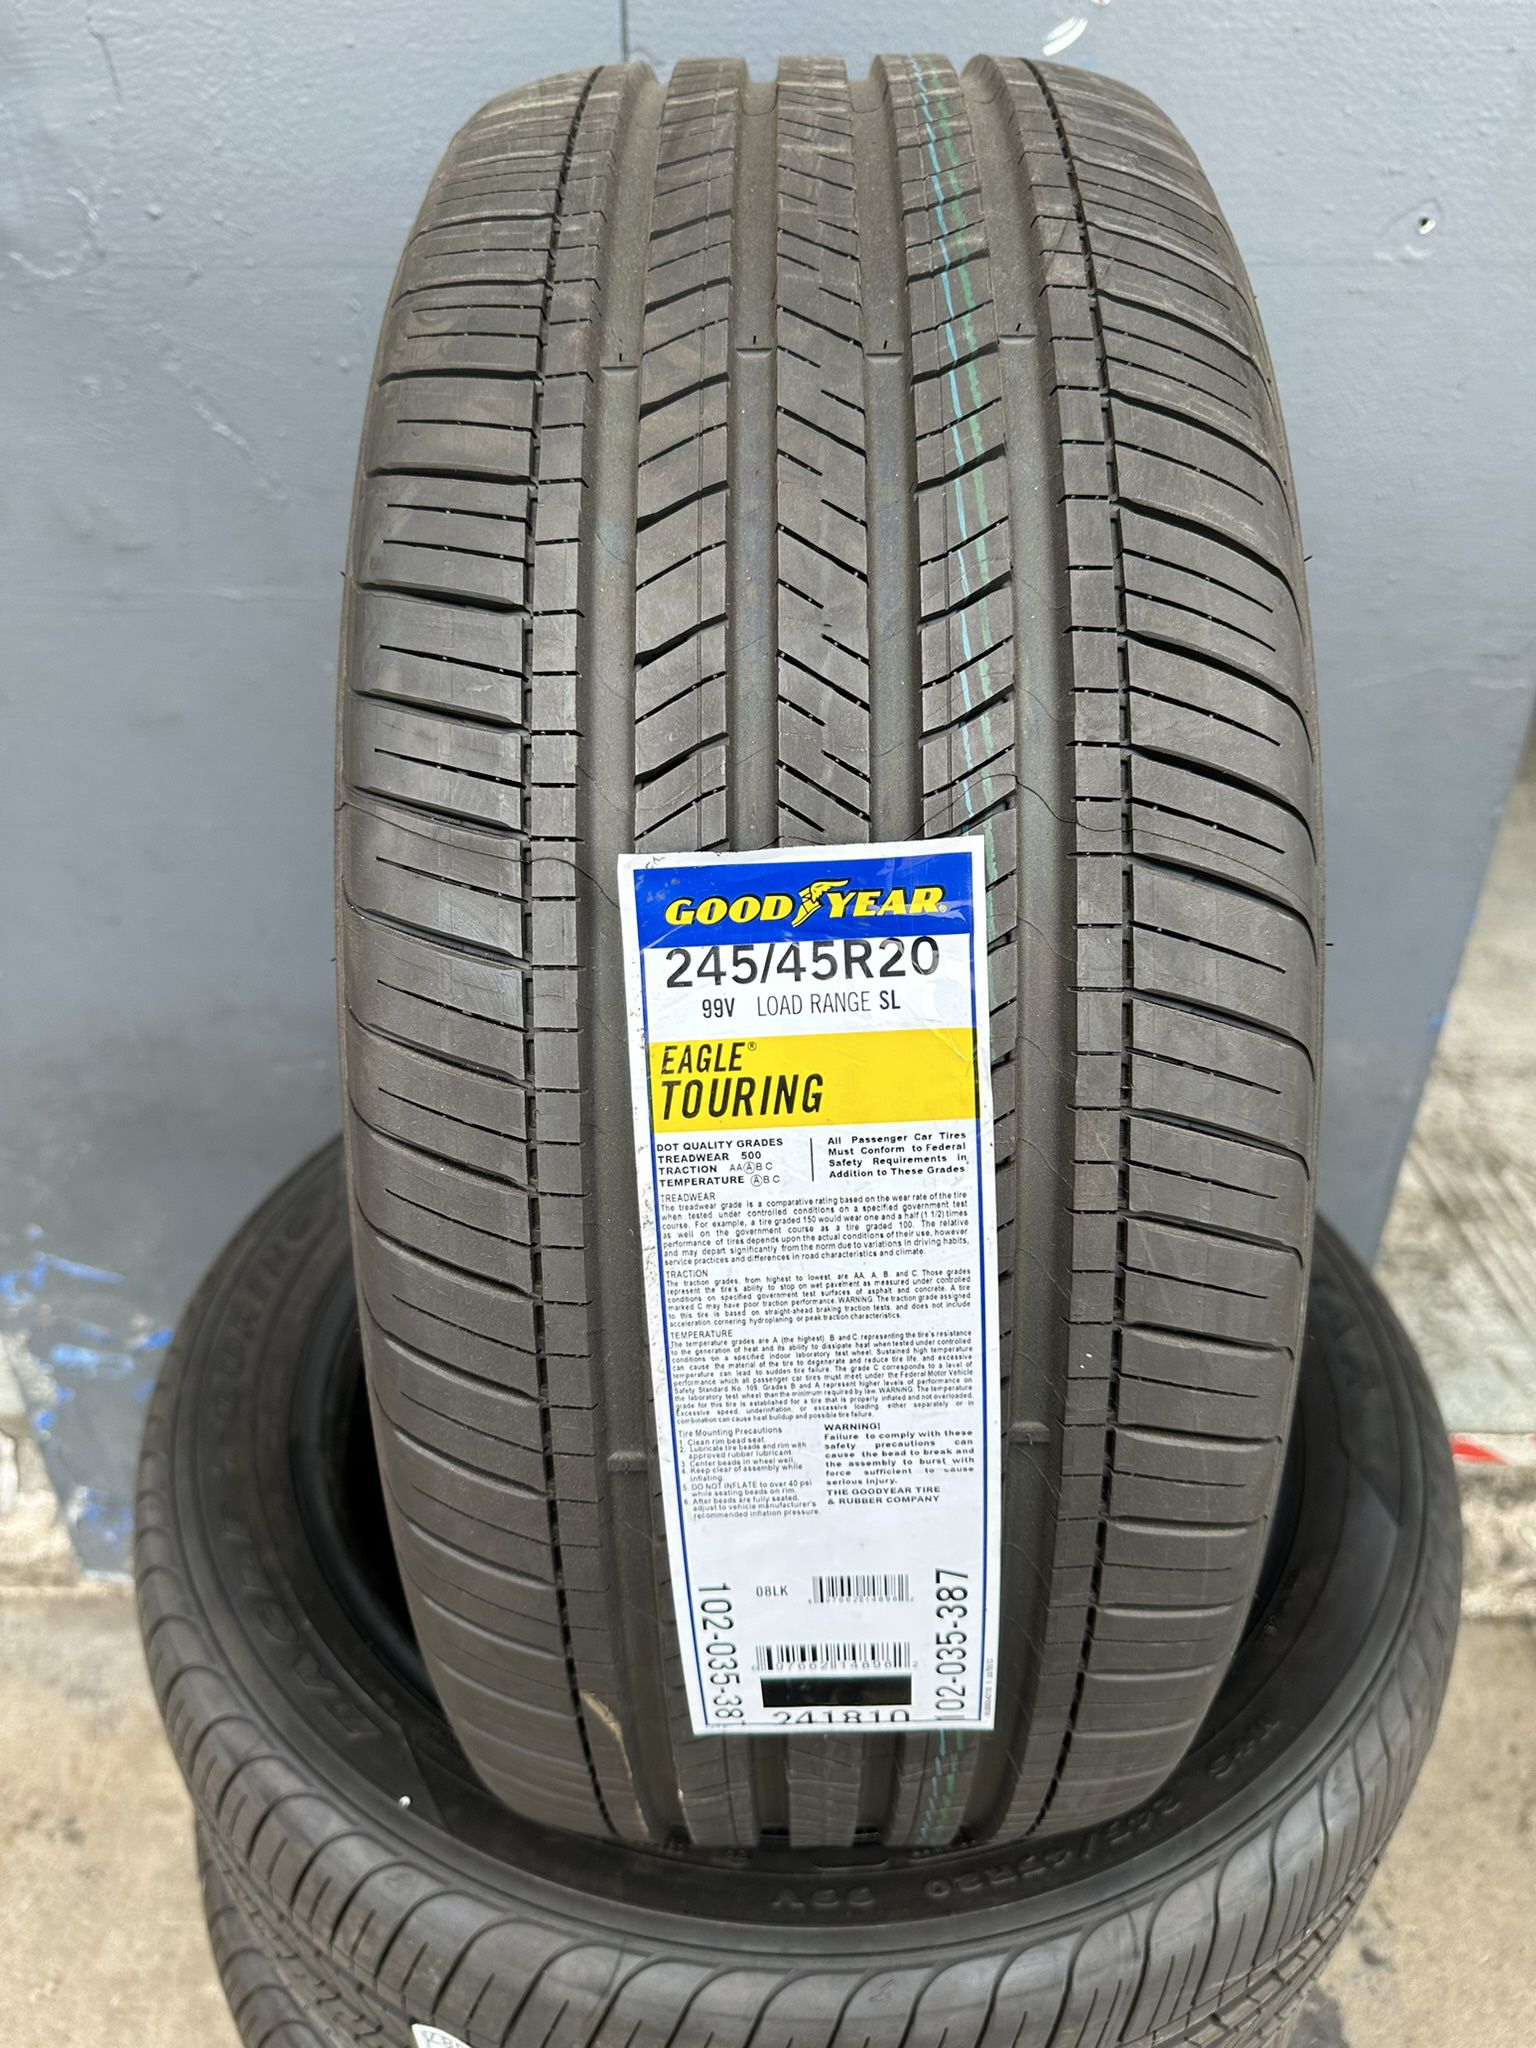 245/45/20 New set Of Goodyear Tires Installed 